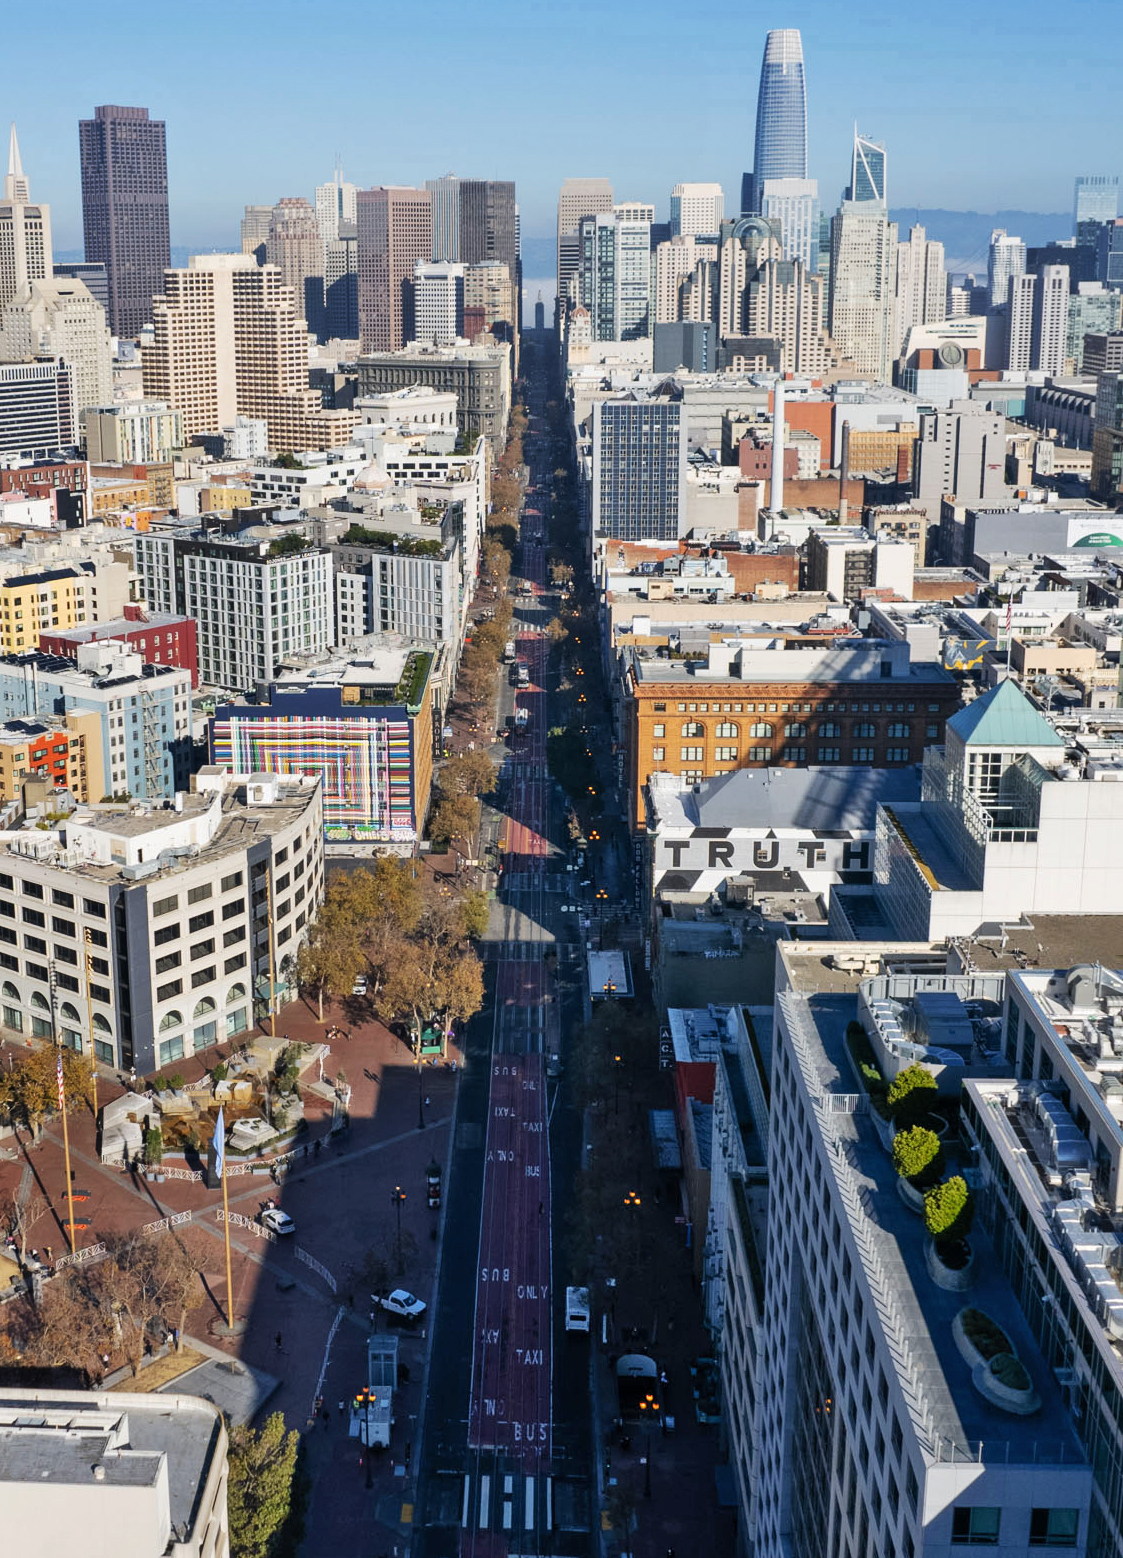 Aerial view of a tree-lined city street leading toward a dense cluster of downtown skyscrapers, with a building marked "TRUTH" on the right.